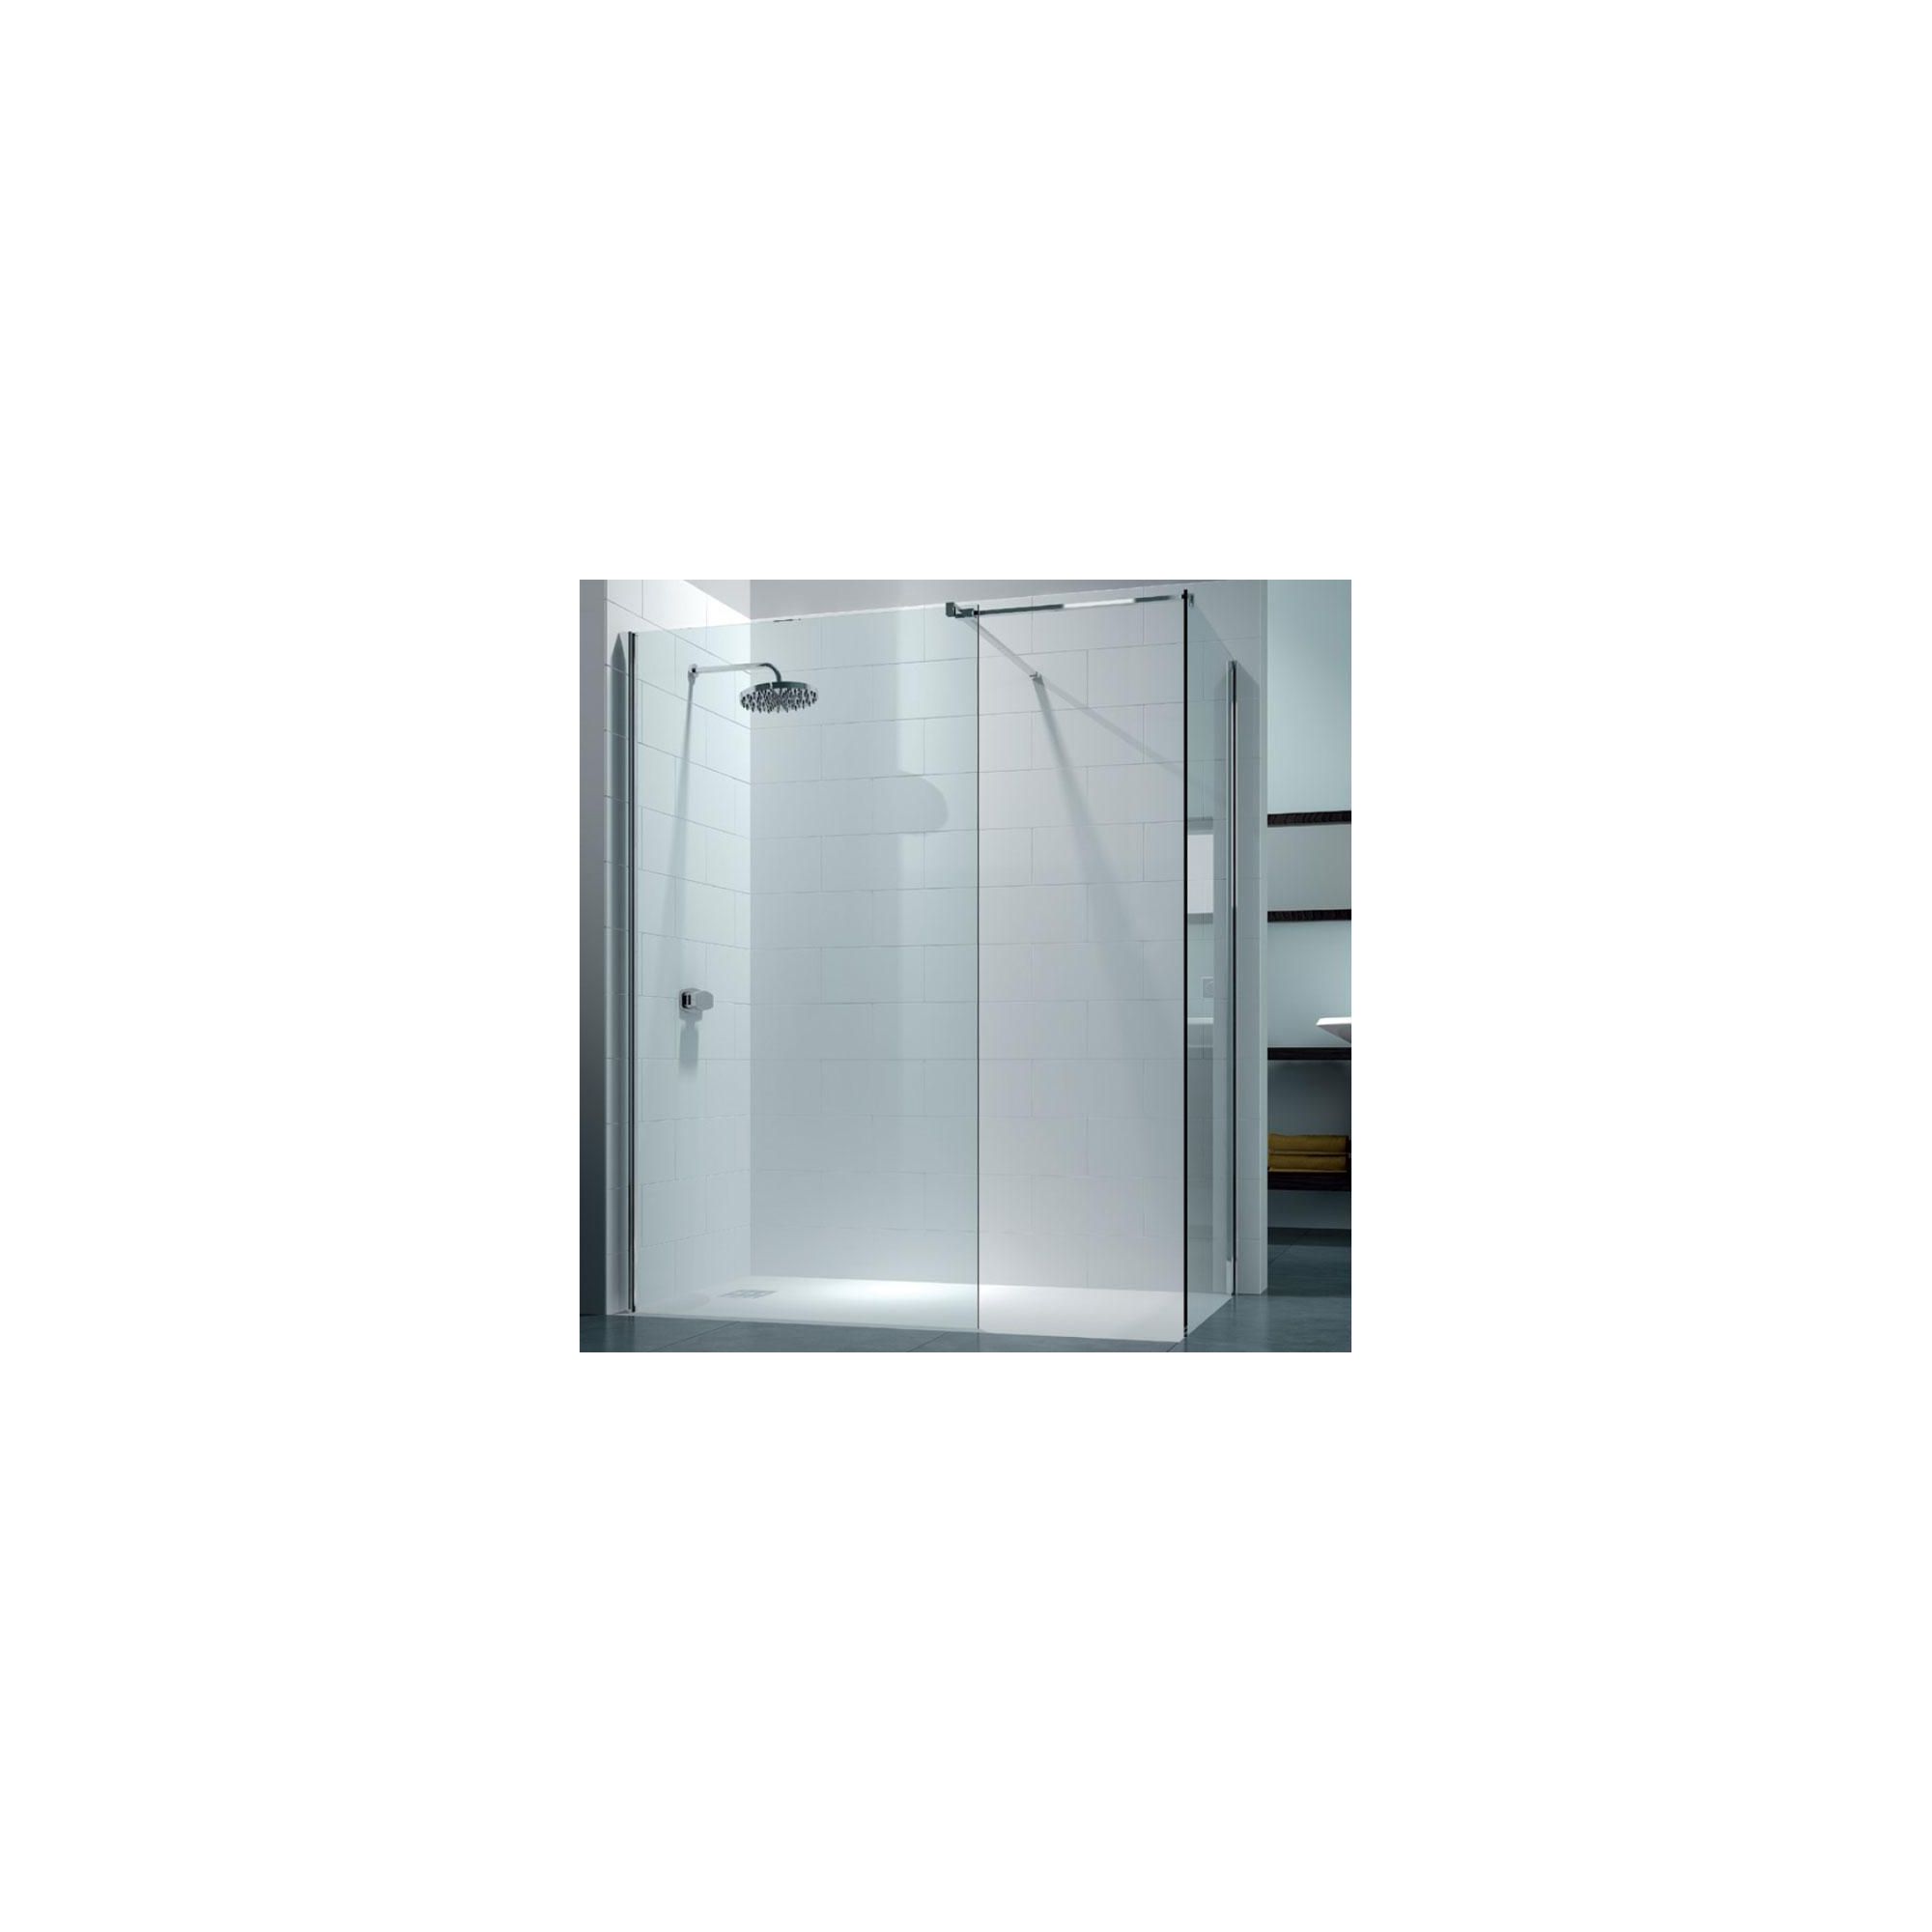 Merlyn Series 8 Walk-In Shower Enclosure, 1400mm x 900mm, 8mm Glass, excluding Tray at Tesco Direct